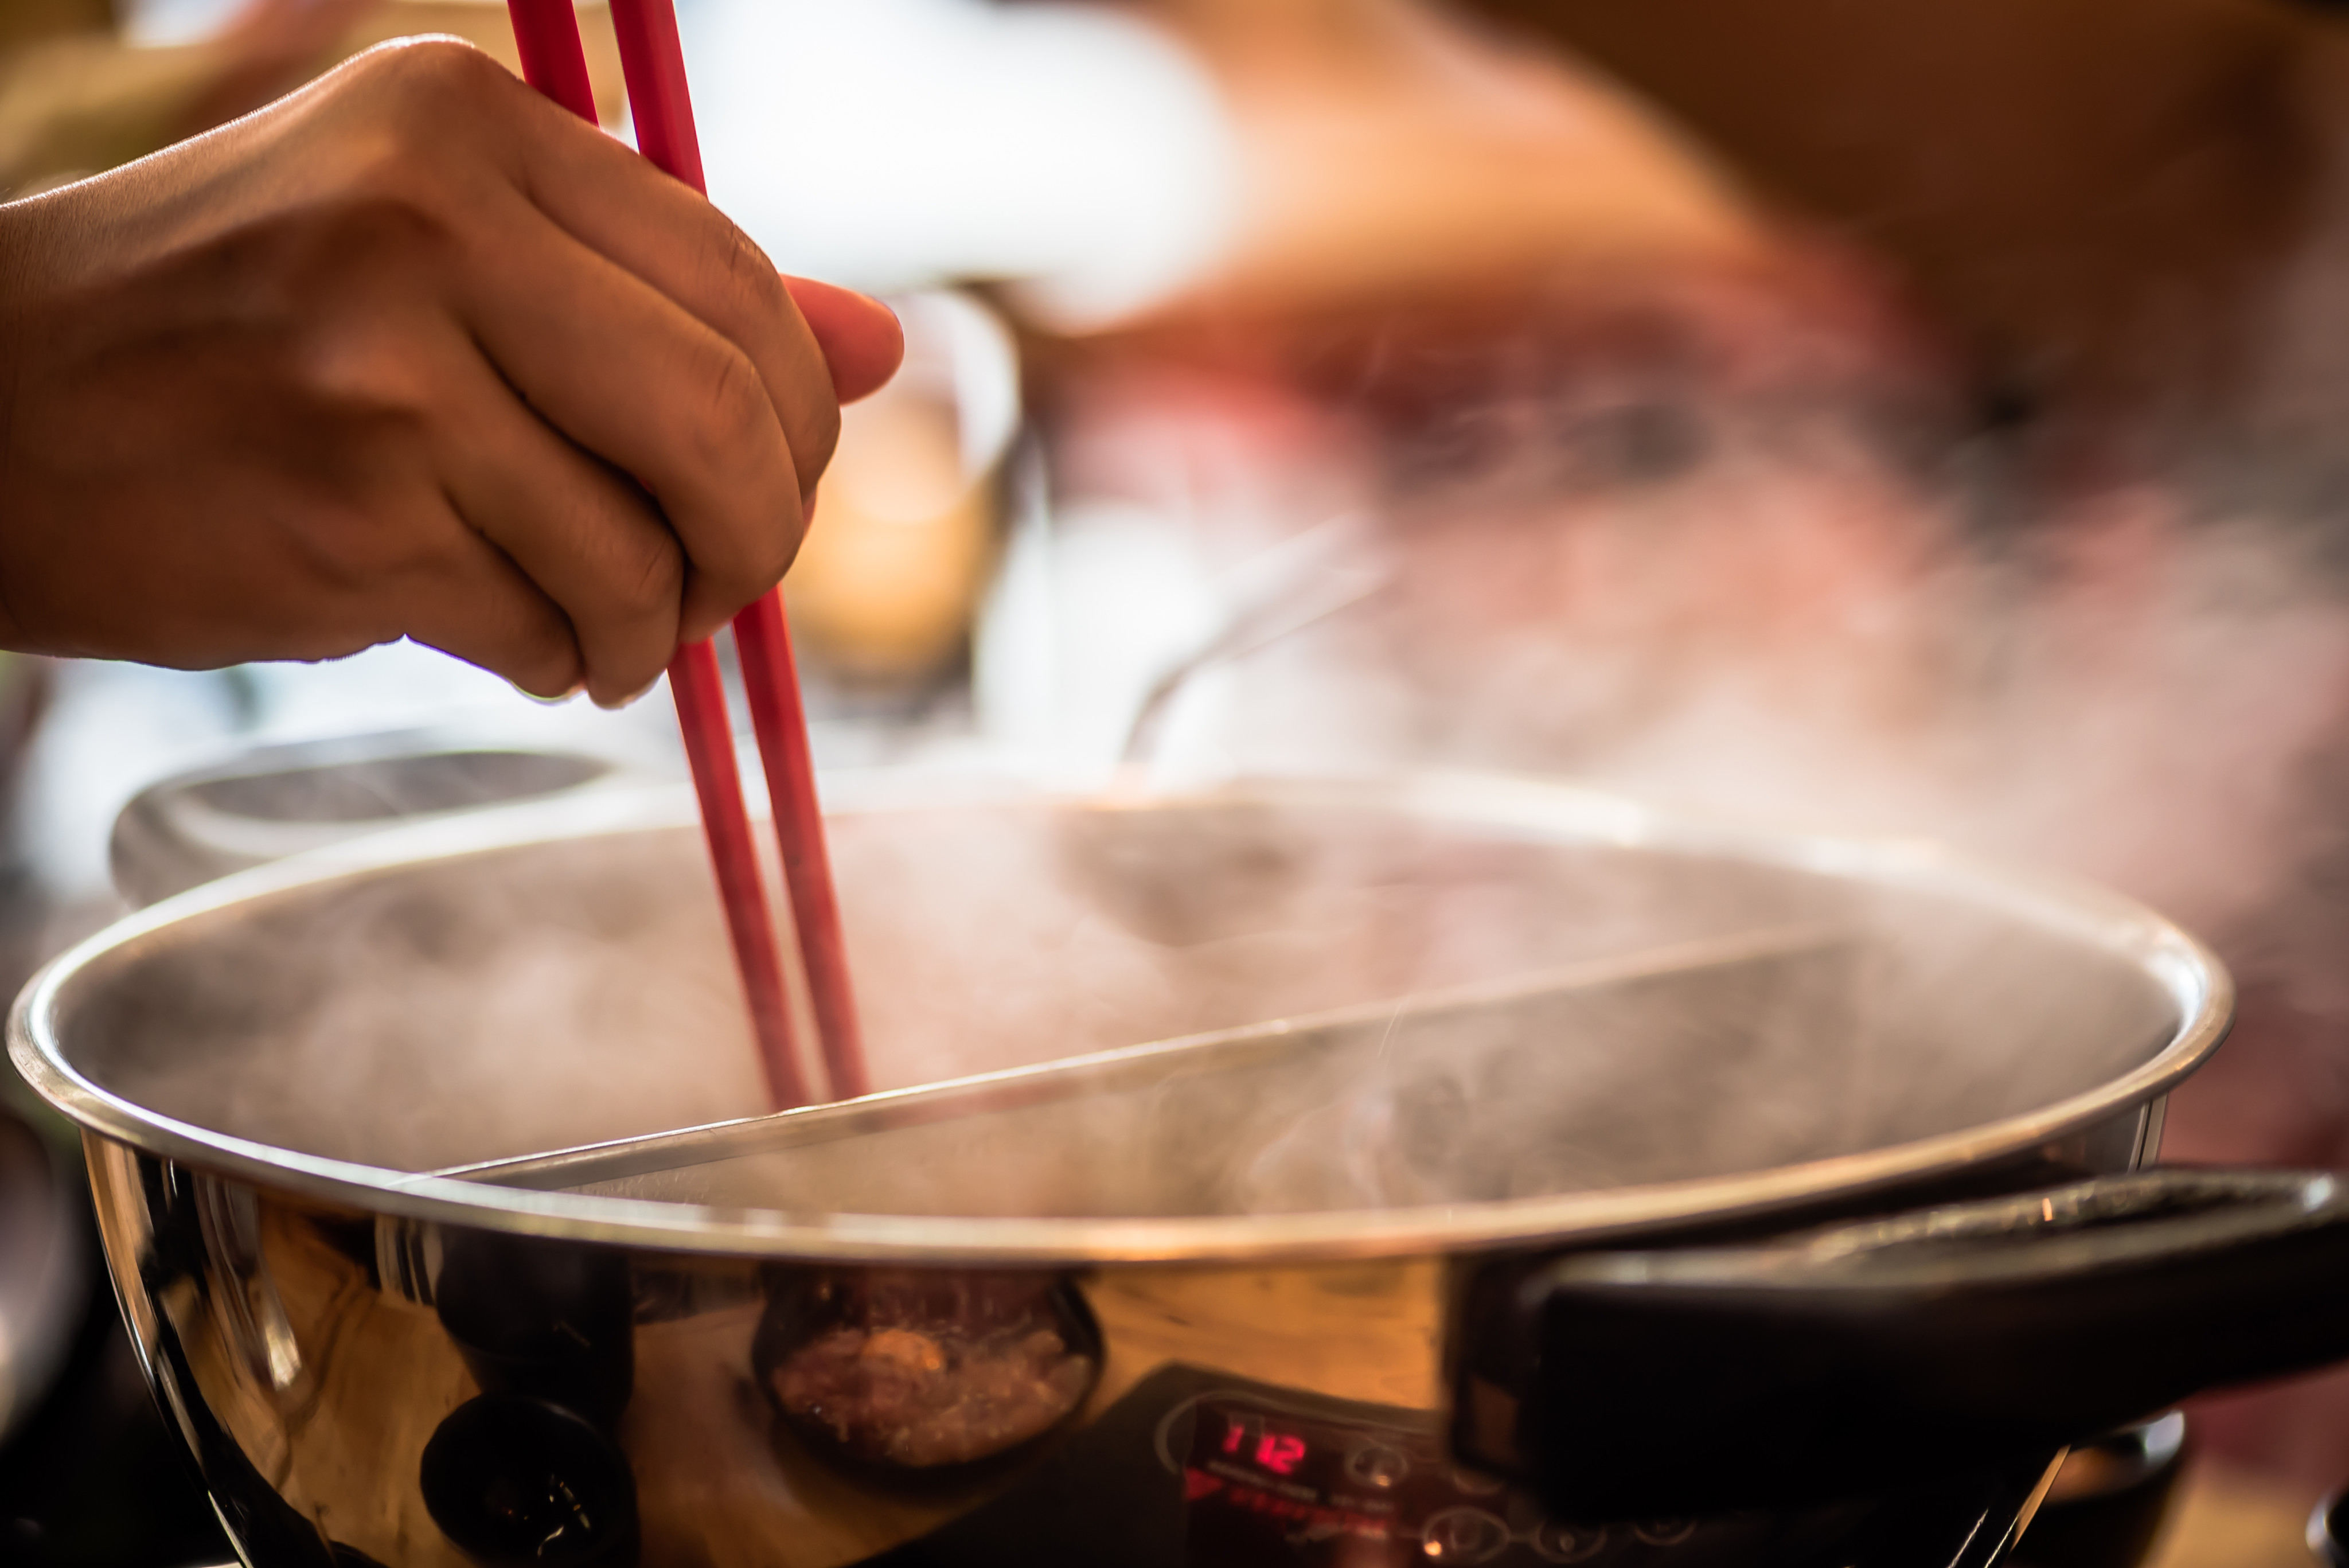 Singapore jailed a woman for 4 years, for flipping a pot of boiling soup onto a man, following a disagreement. Photo: Shutterstock
